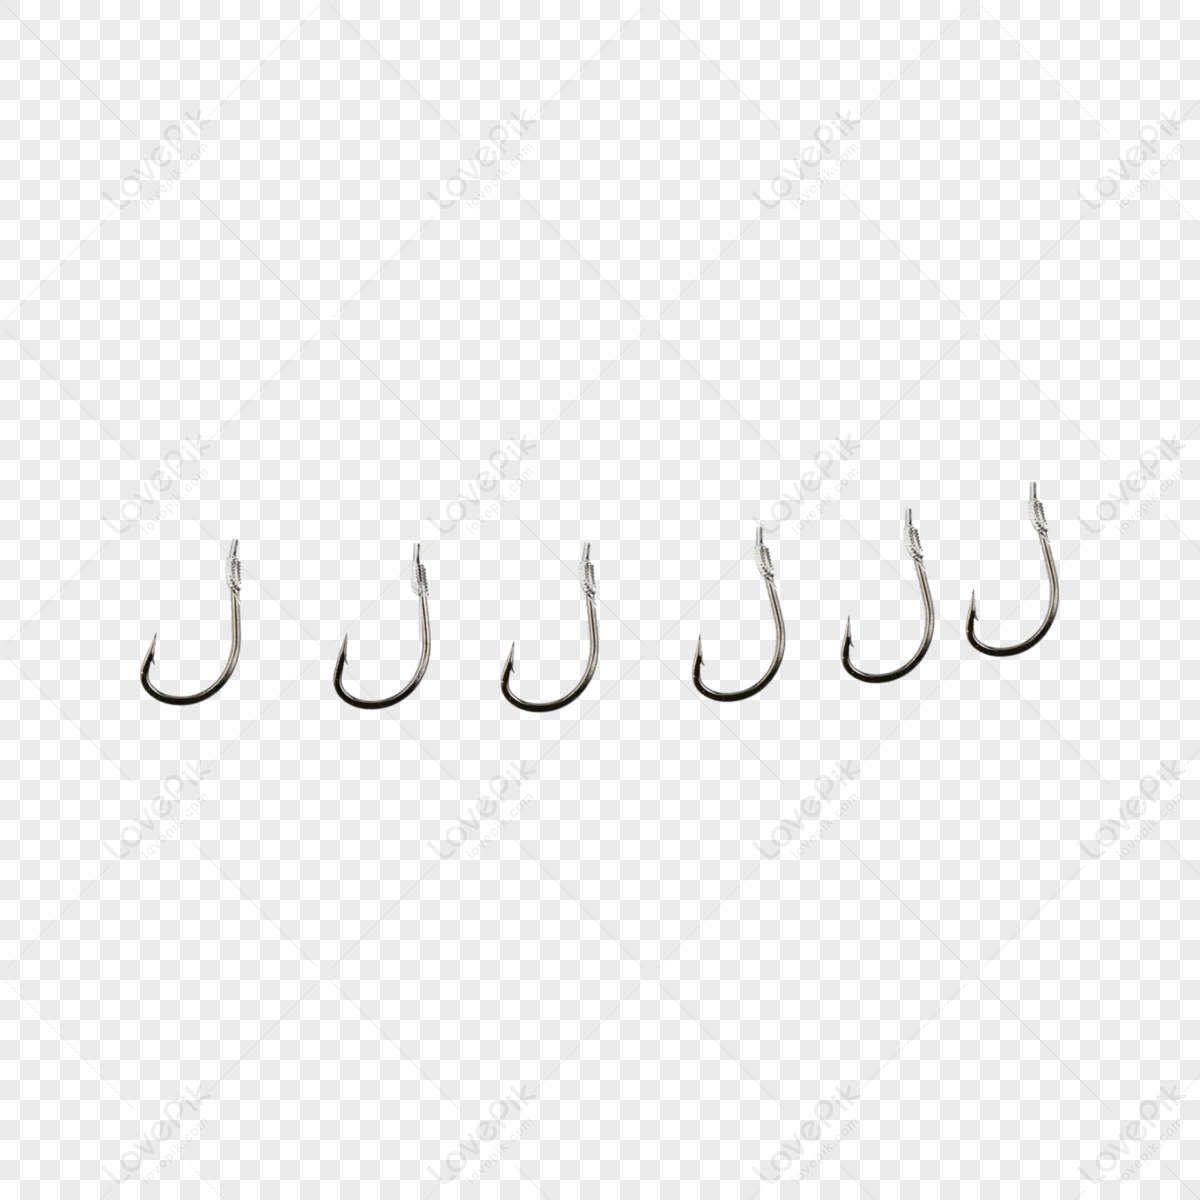 Fish Hook PNG Images With Transparent Background